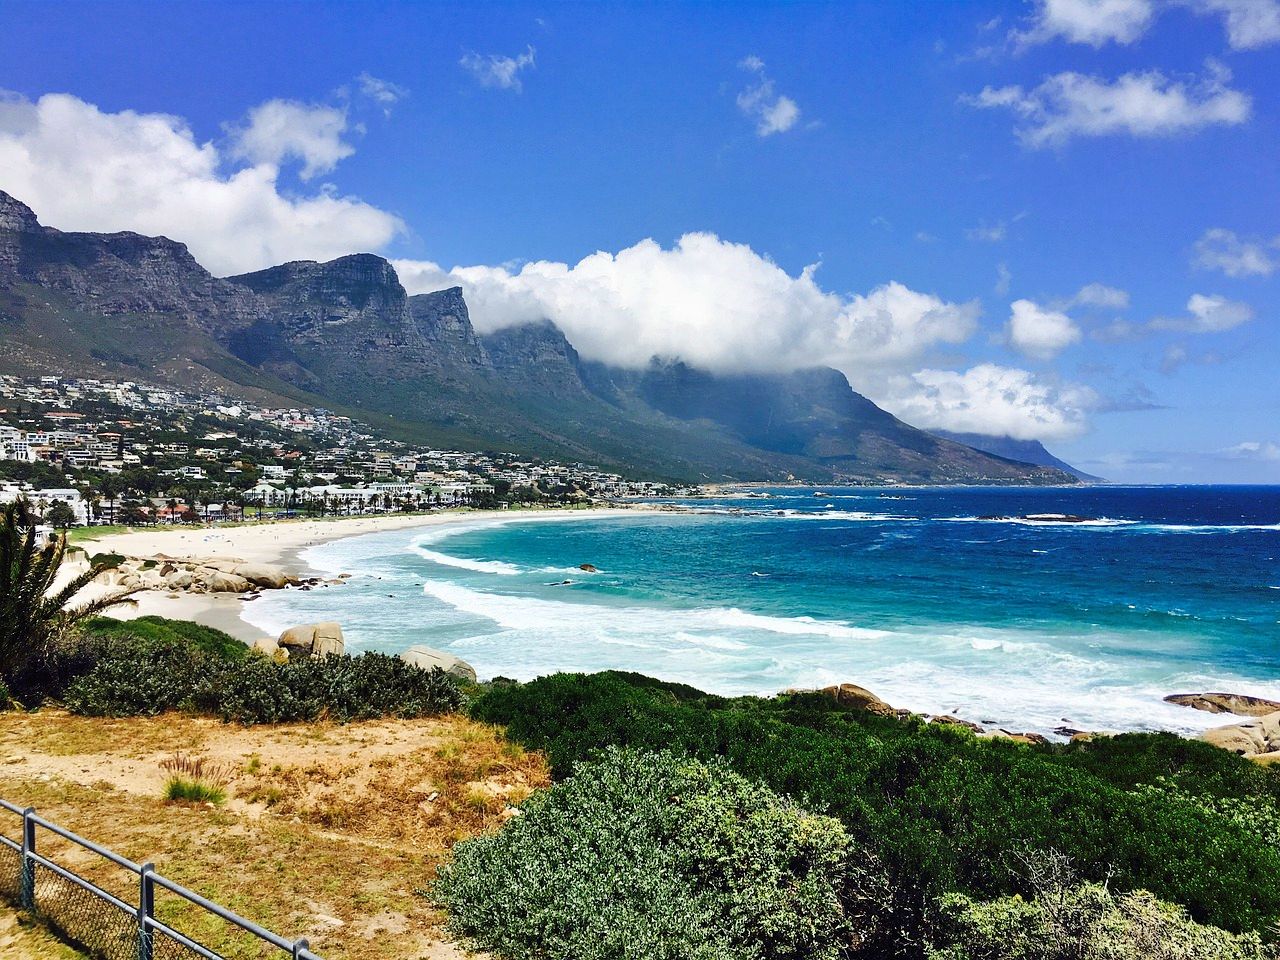 Camps Bay and the 12 Apostle Mountains